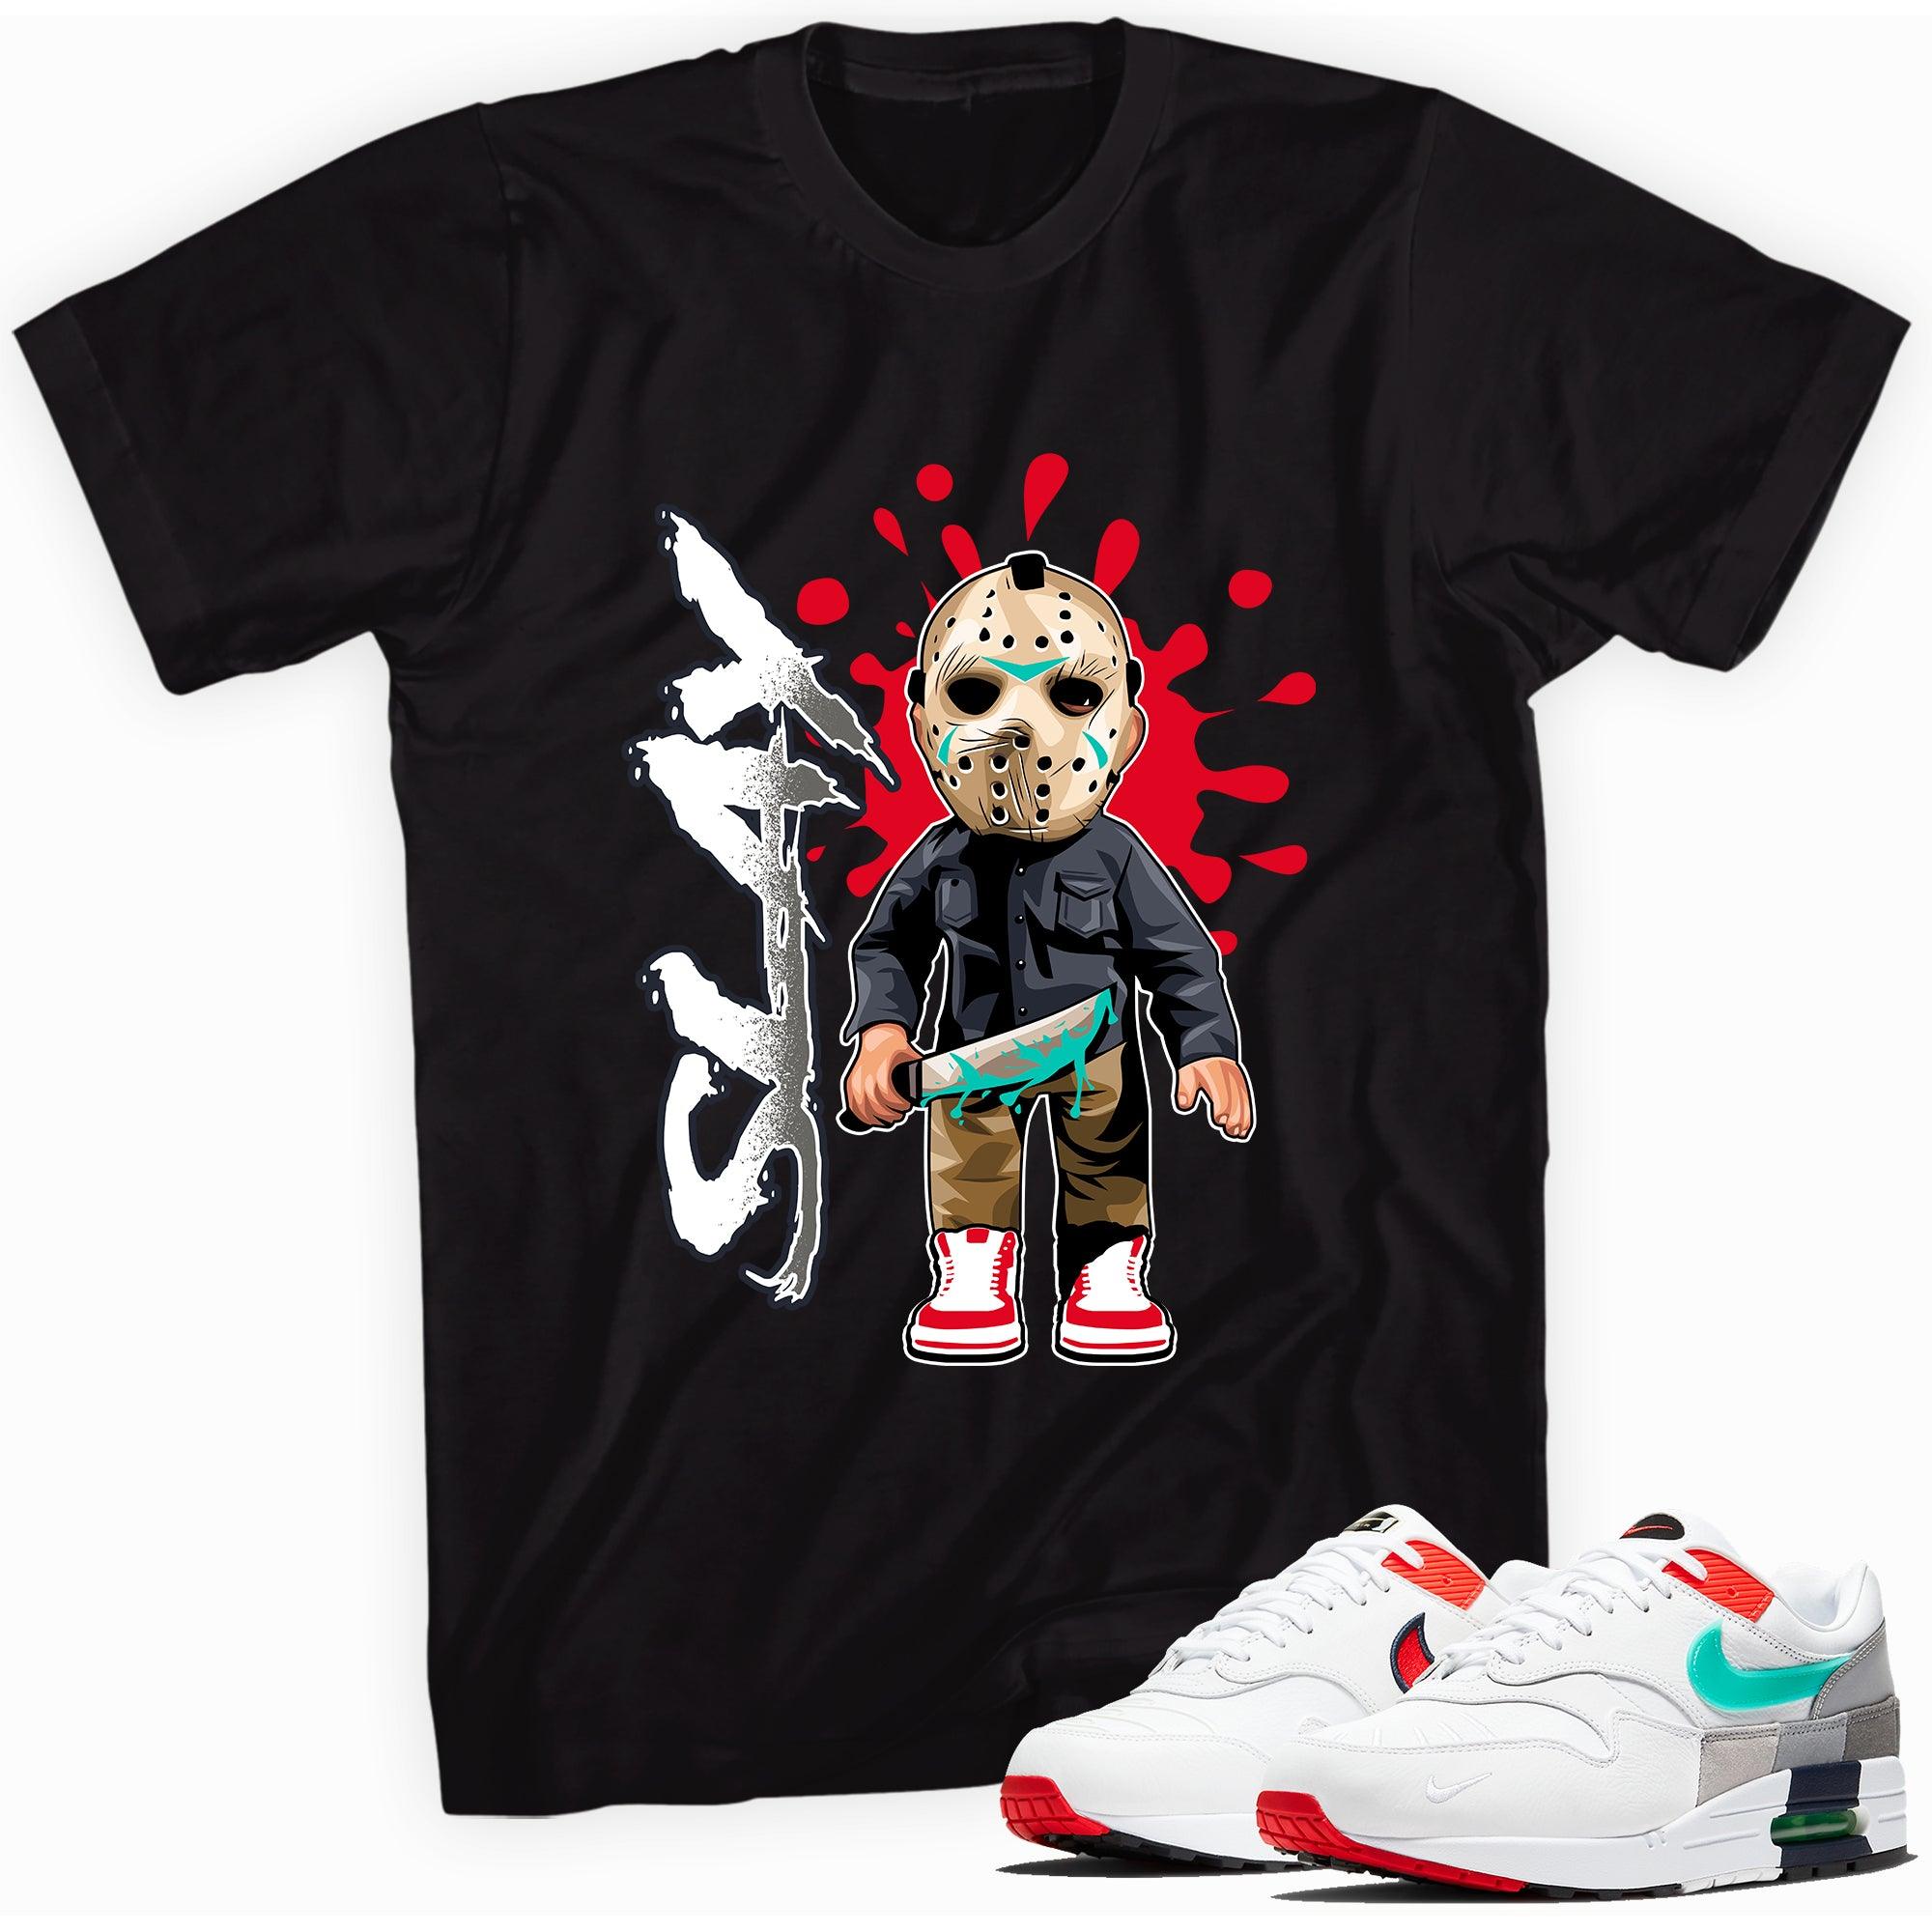 Friday the 13th Shirt Nike Air Max 1 Evolution Of Icons photo